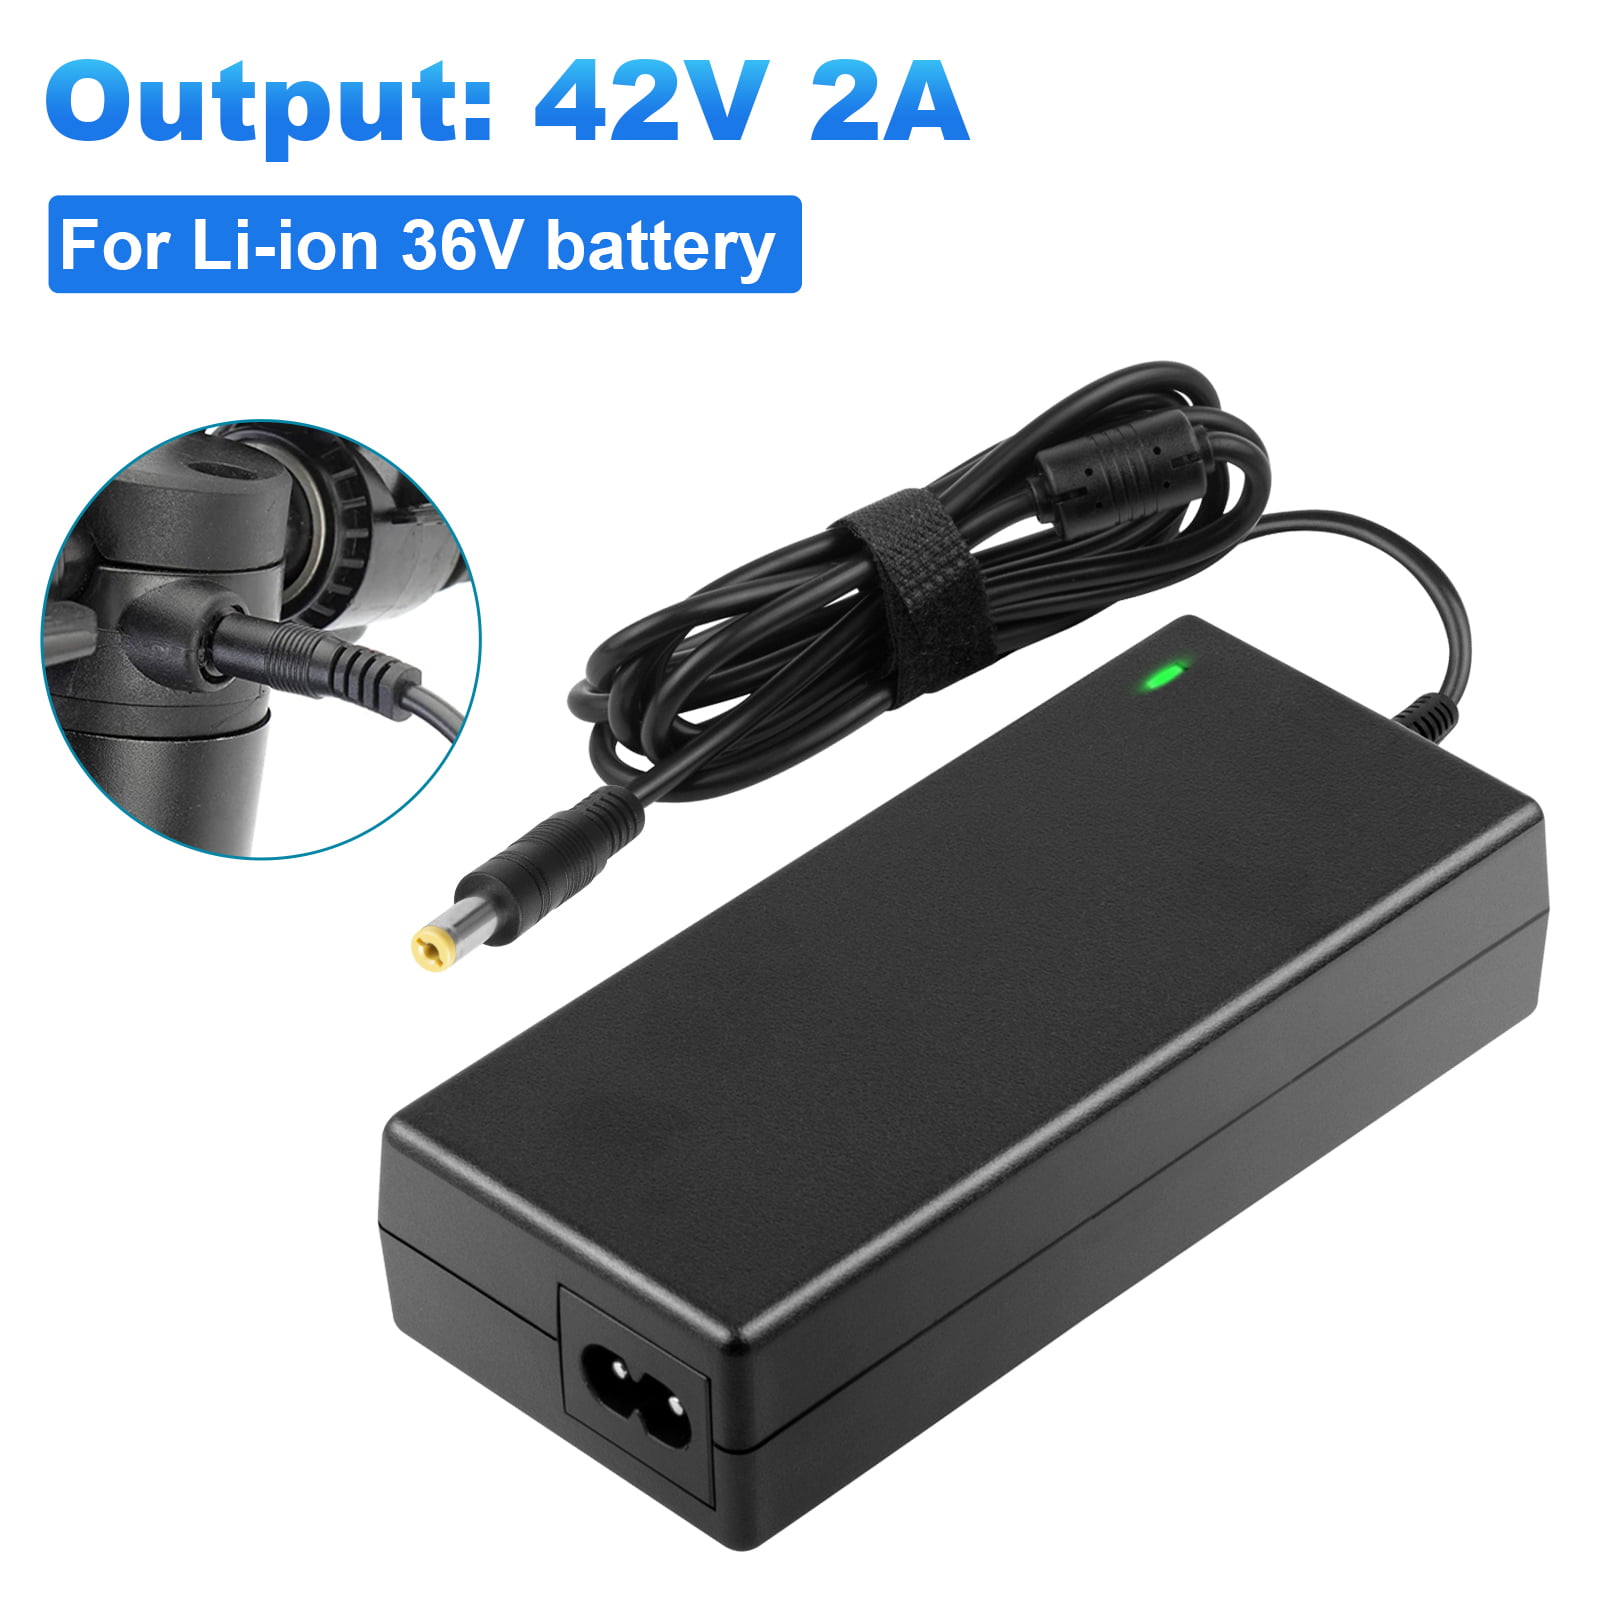 42V 2A Charger Scooter Power Adapter Charger DC Port for Scooter Battery  Pack Electric Longboard Skateboard Output